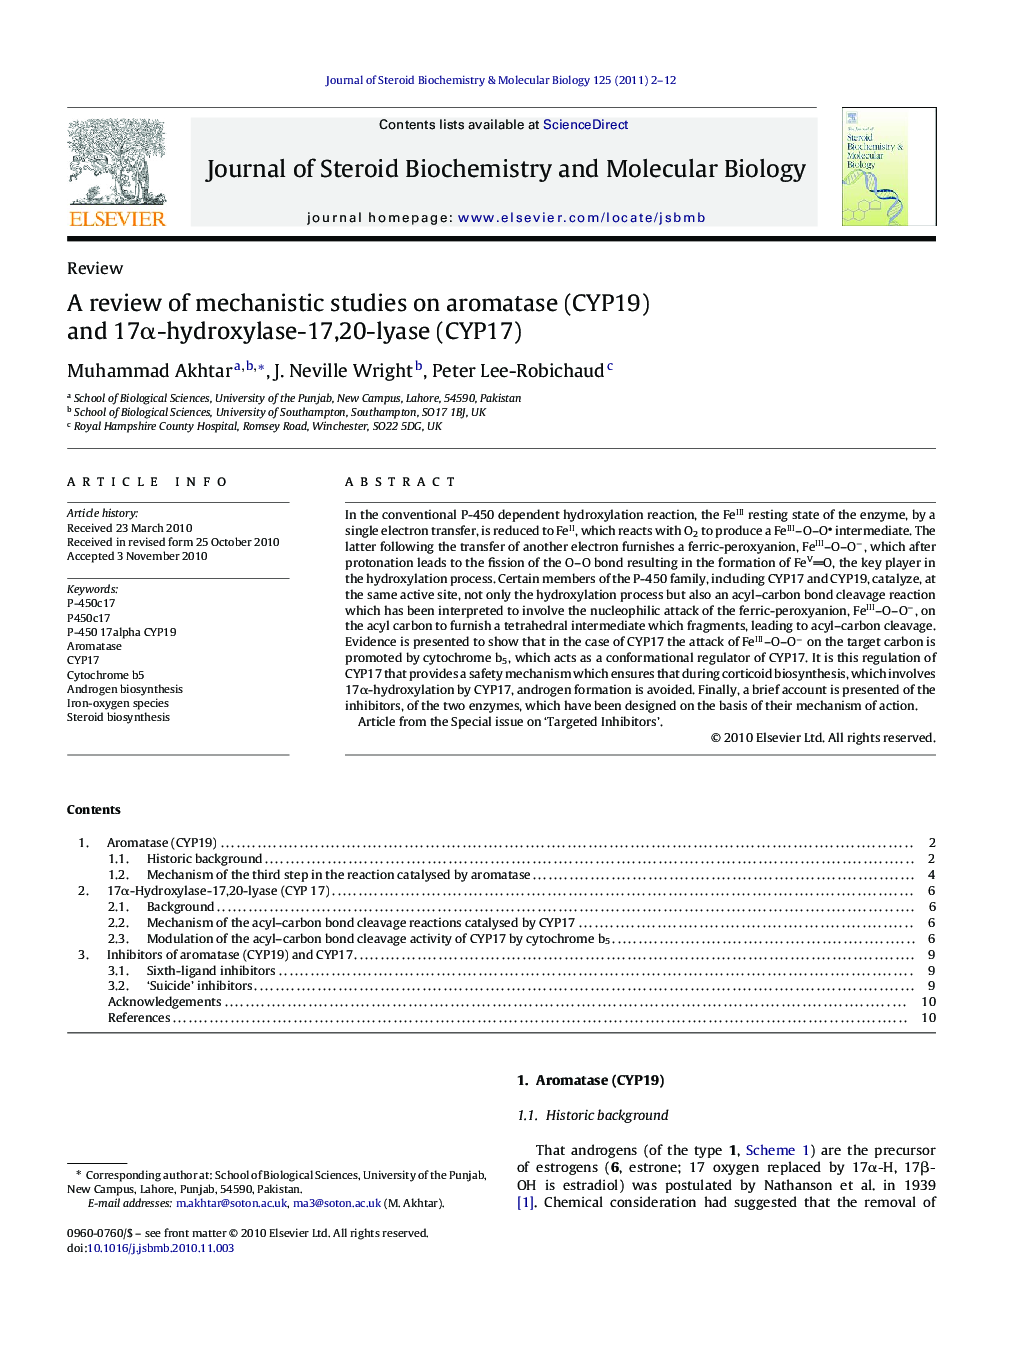 A review of mechanistic studies on aromatase (CYP19) and 17α-hydroxylase-17,20-lyase (CYP17)